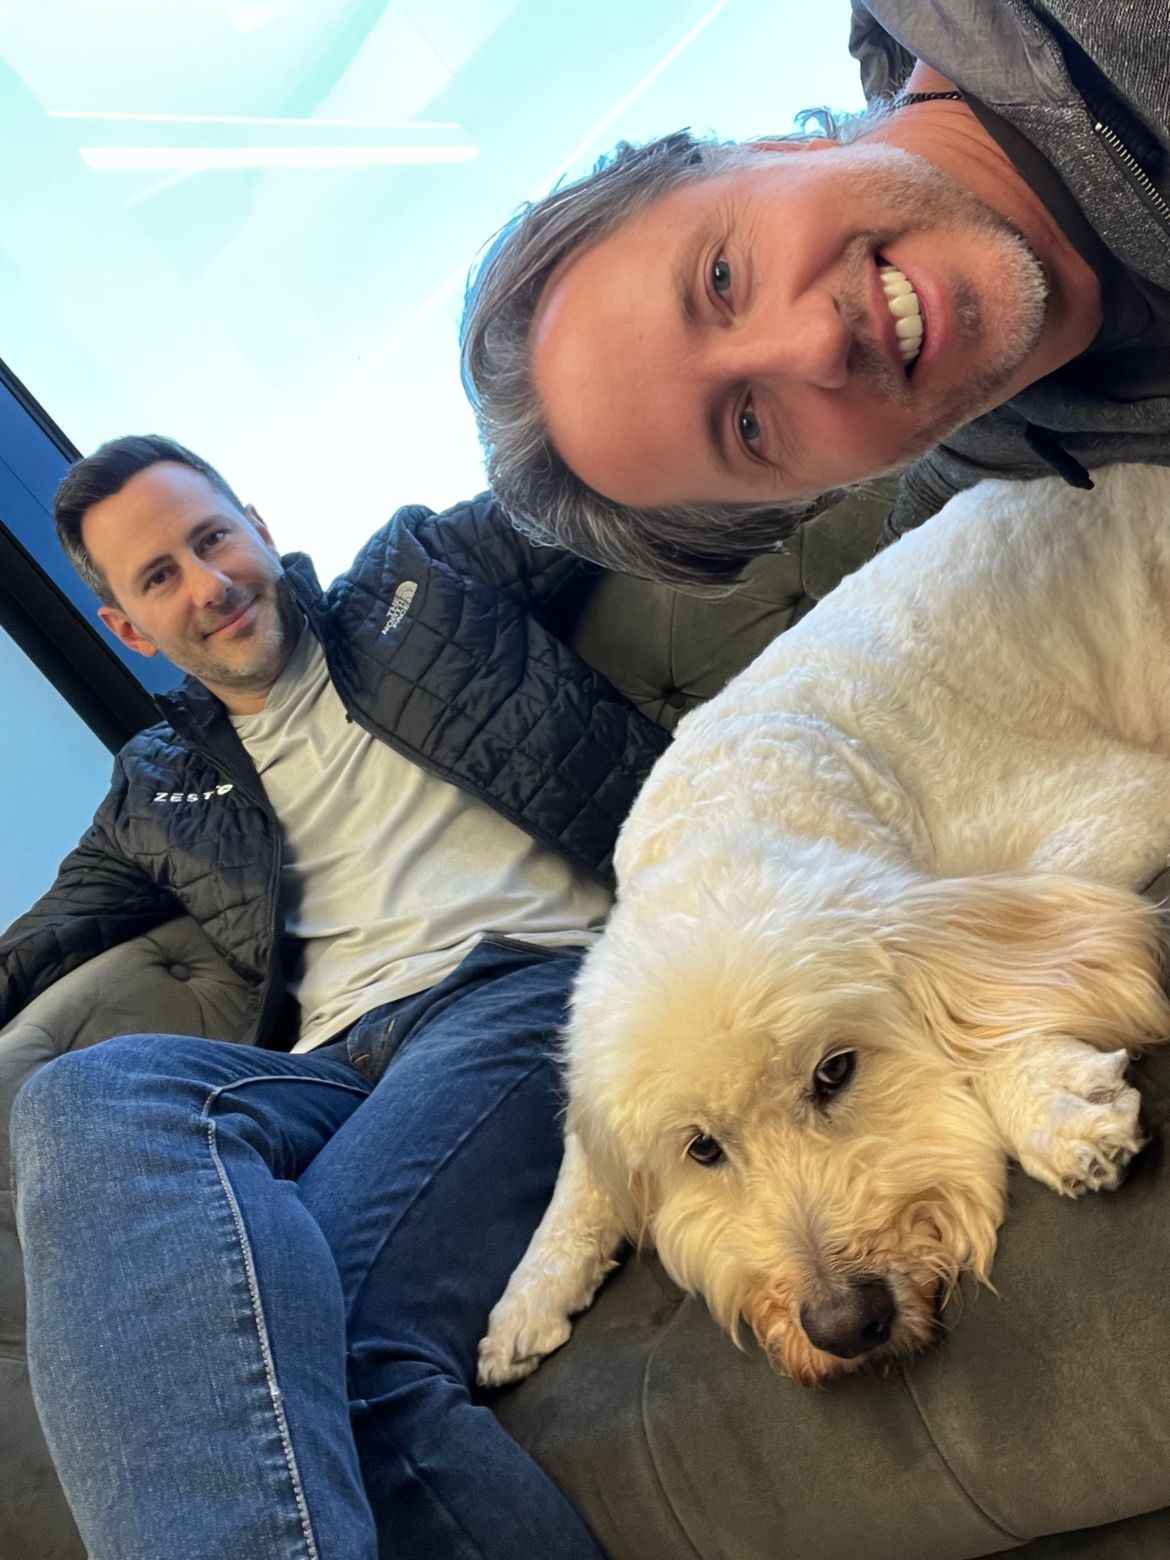 Fun visit to the Zest office with Mike de Vere, CEO and Dan Chiazza, COO.  Fur friends are ALWAYS welcome!